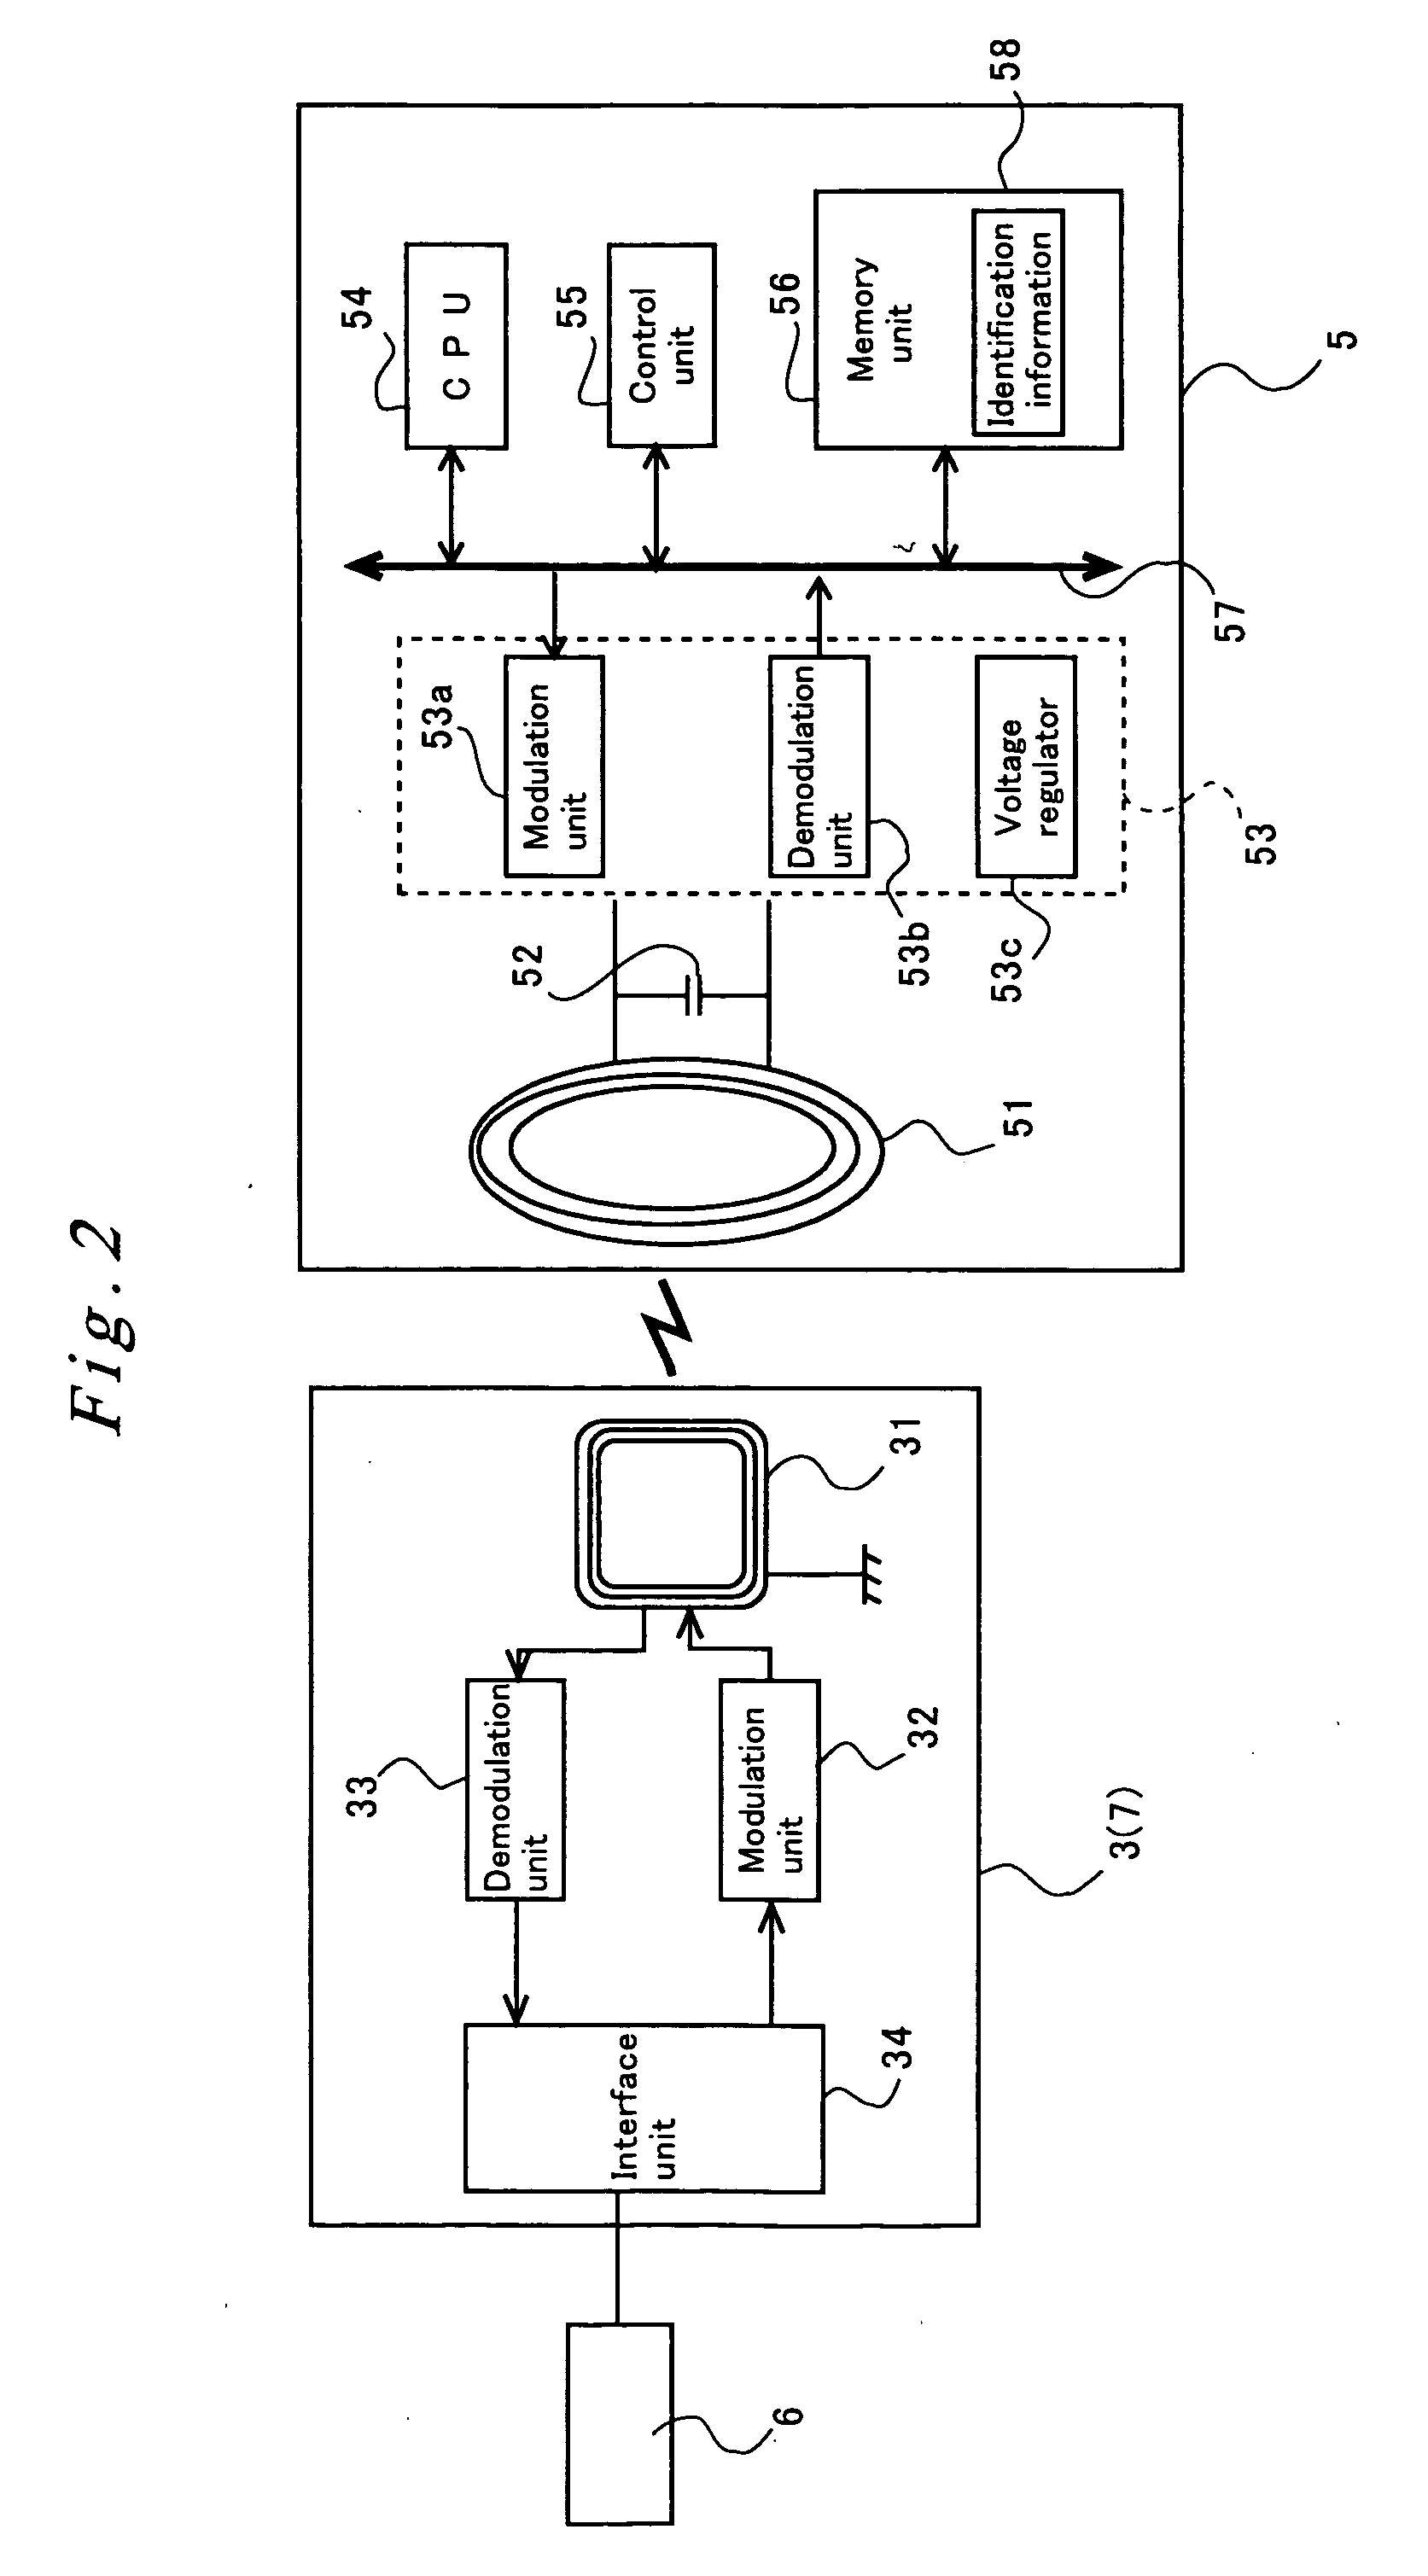 Instruction dropout warning system and method